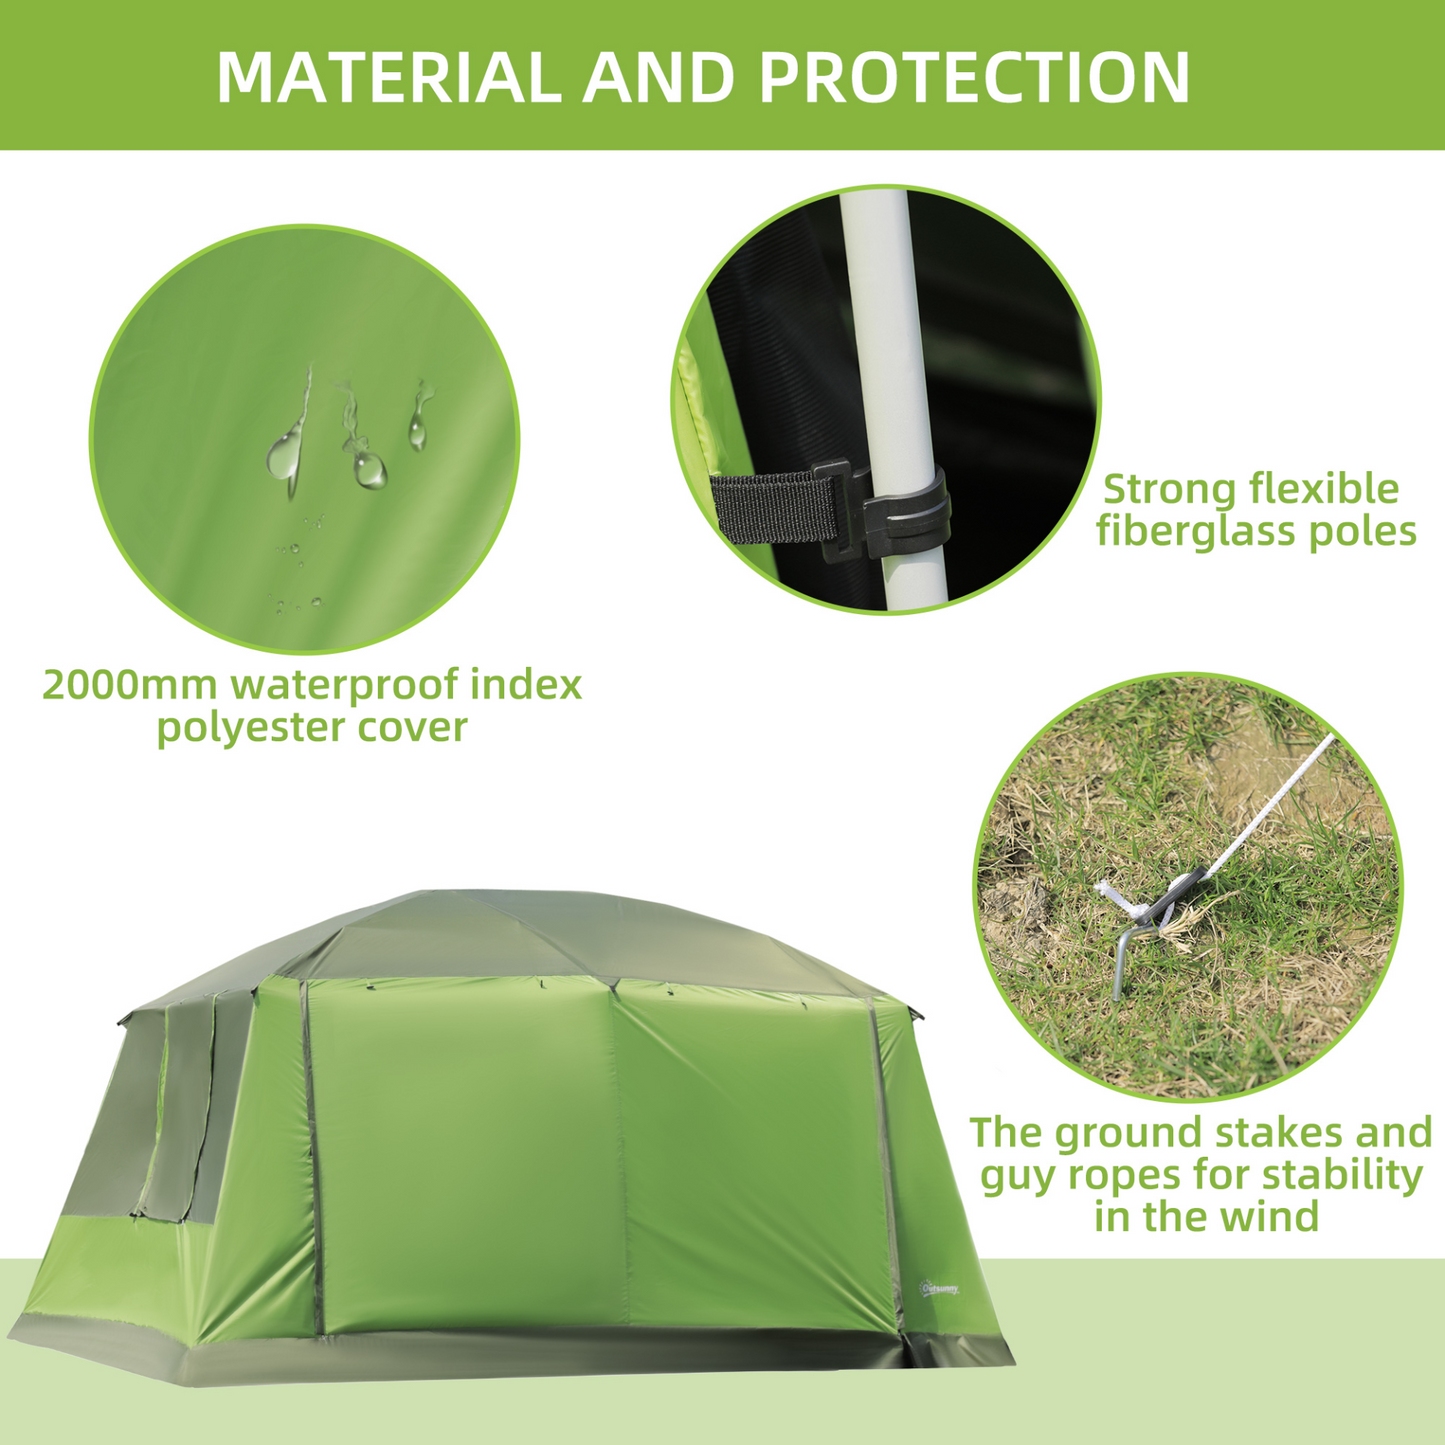 Outsunny Two Room Dome Tent w/ Porch for 4-8 Man, Camping Backpacking Shelter w/ Mesh Windows, Zipped Doors, Lamp Hook & Portable Carry Bag